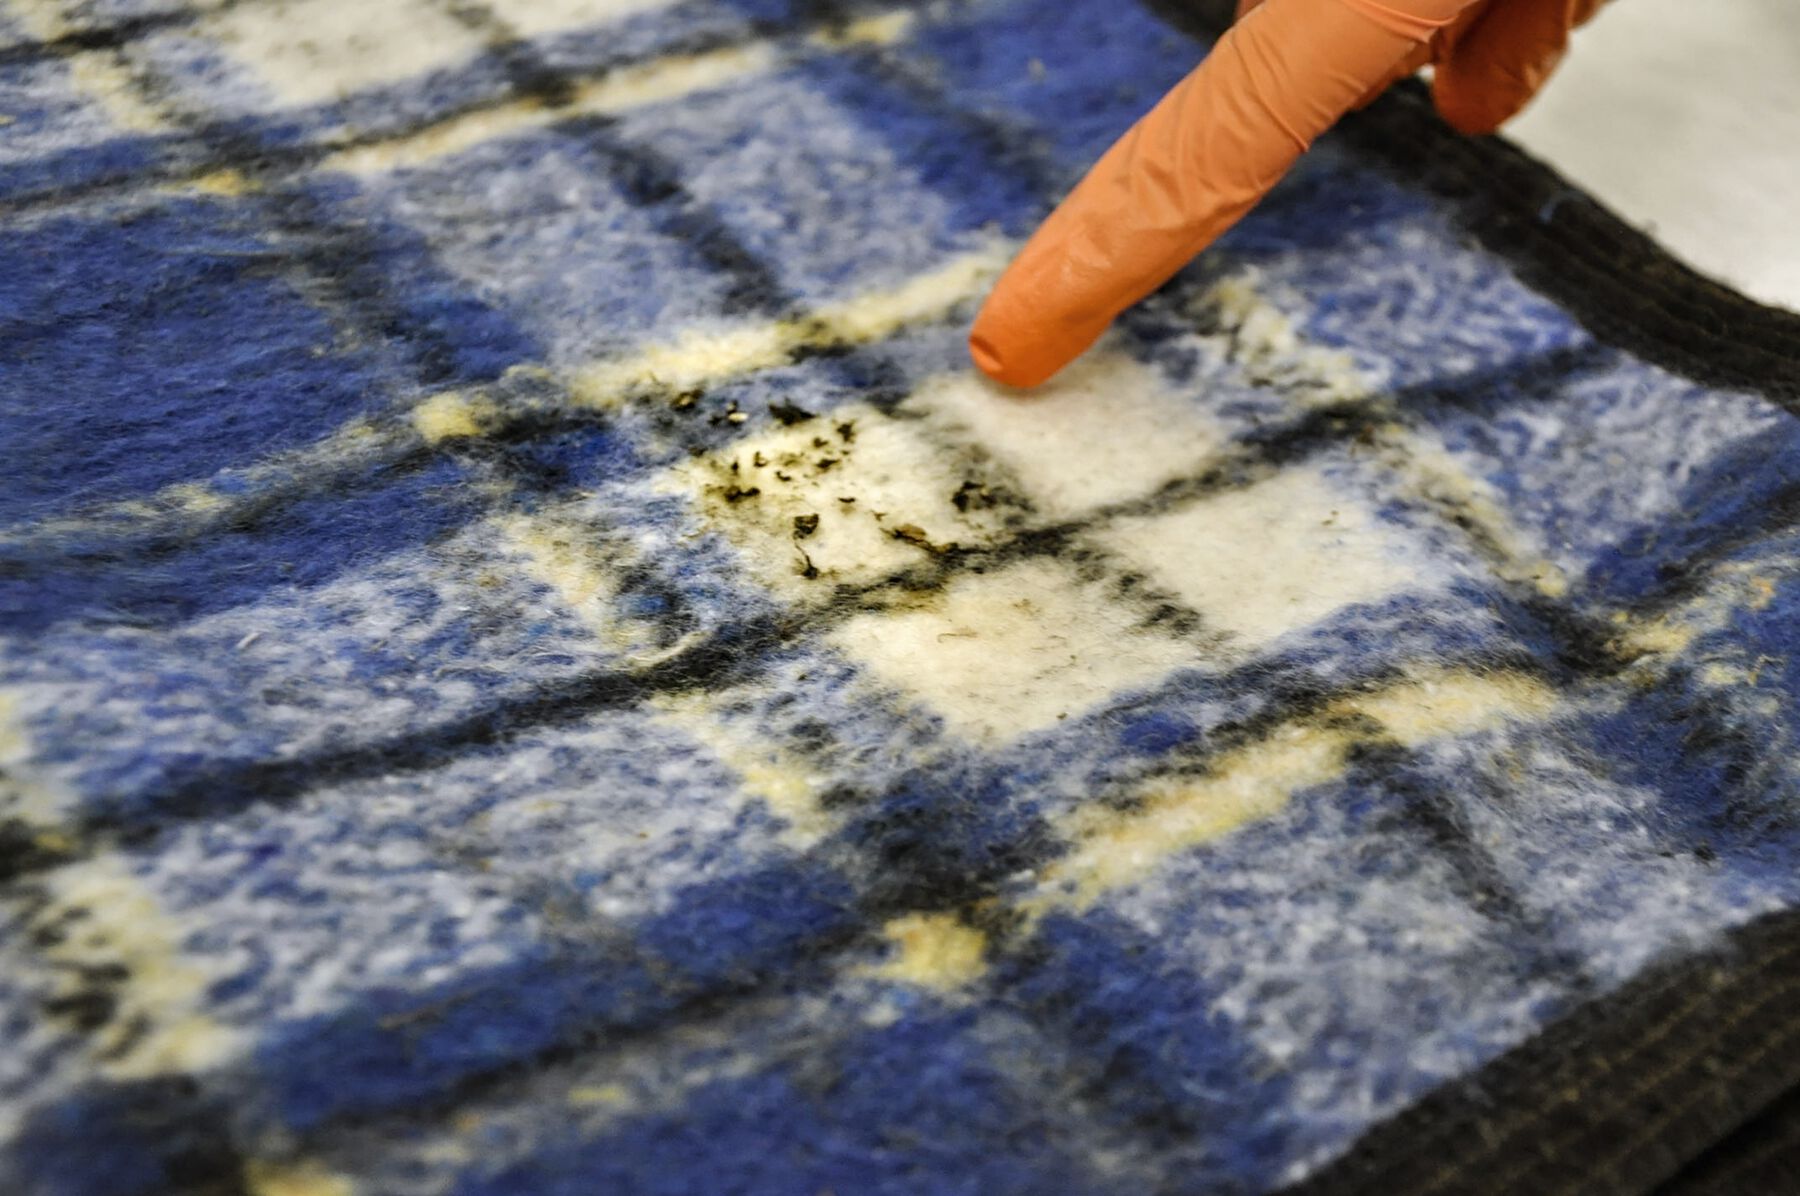 Zoomed-in gloved finger pointing at green plant-matter fragments on plaid blue and grey fuzzy blanket